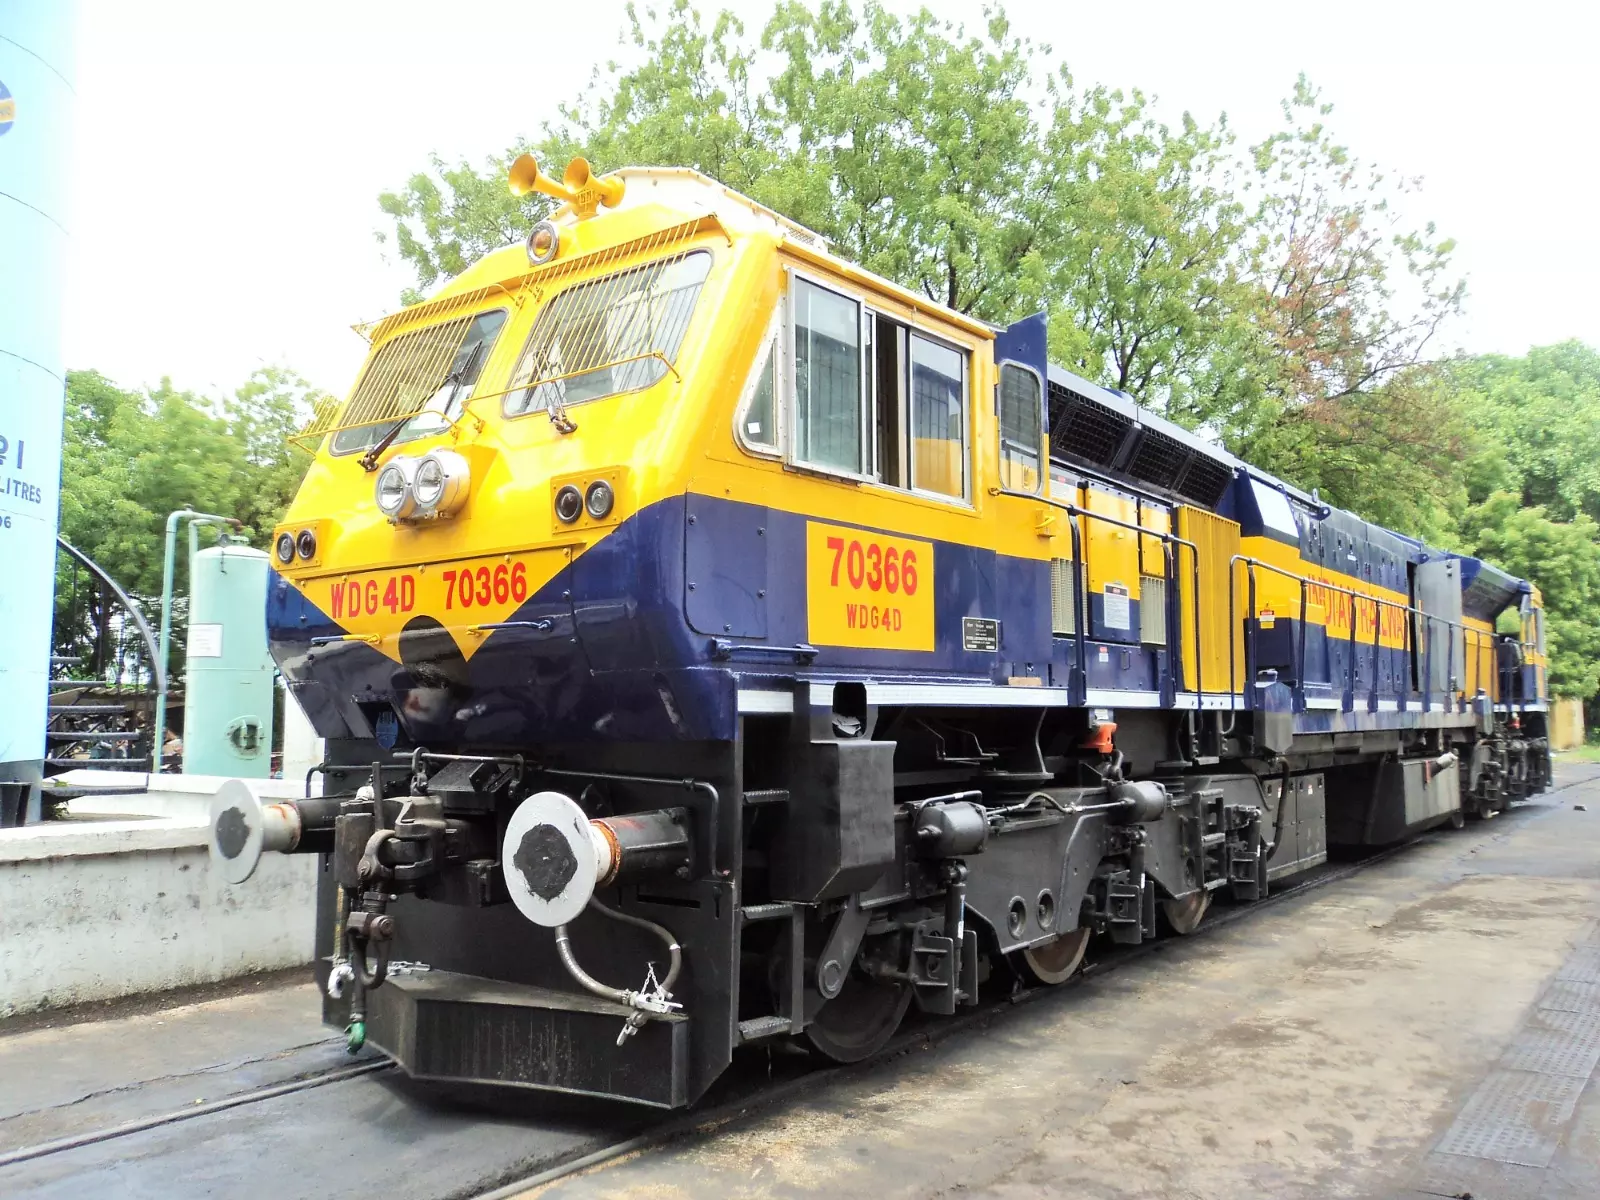 Kazipet Loco Shed Secures First Place Among Indian Railways